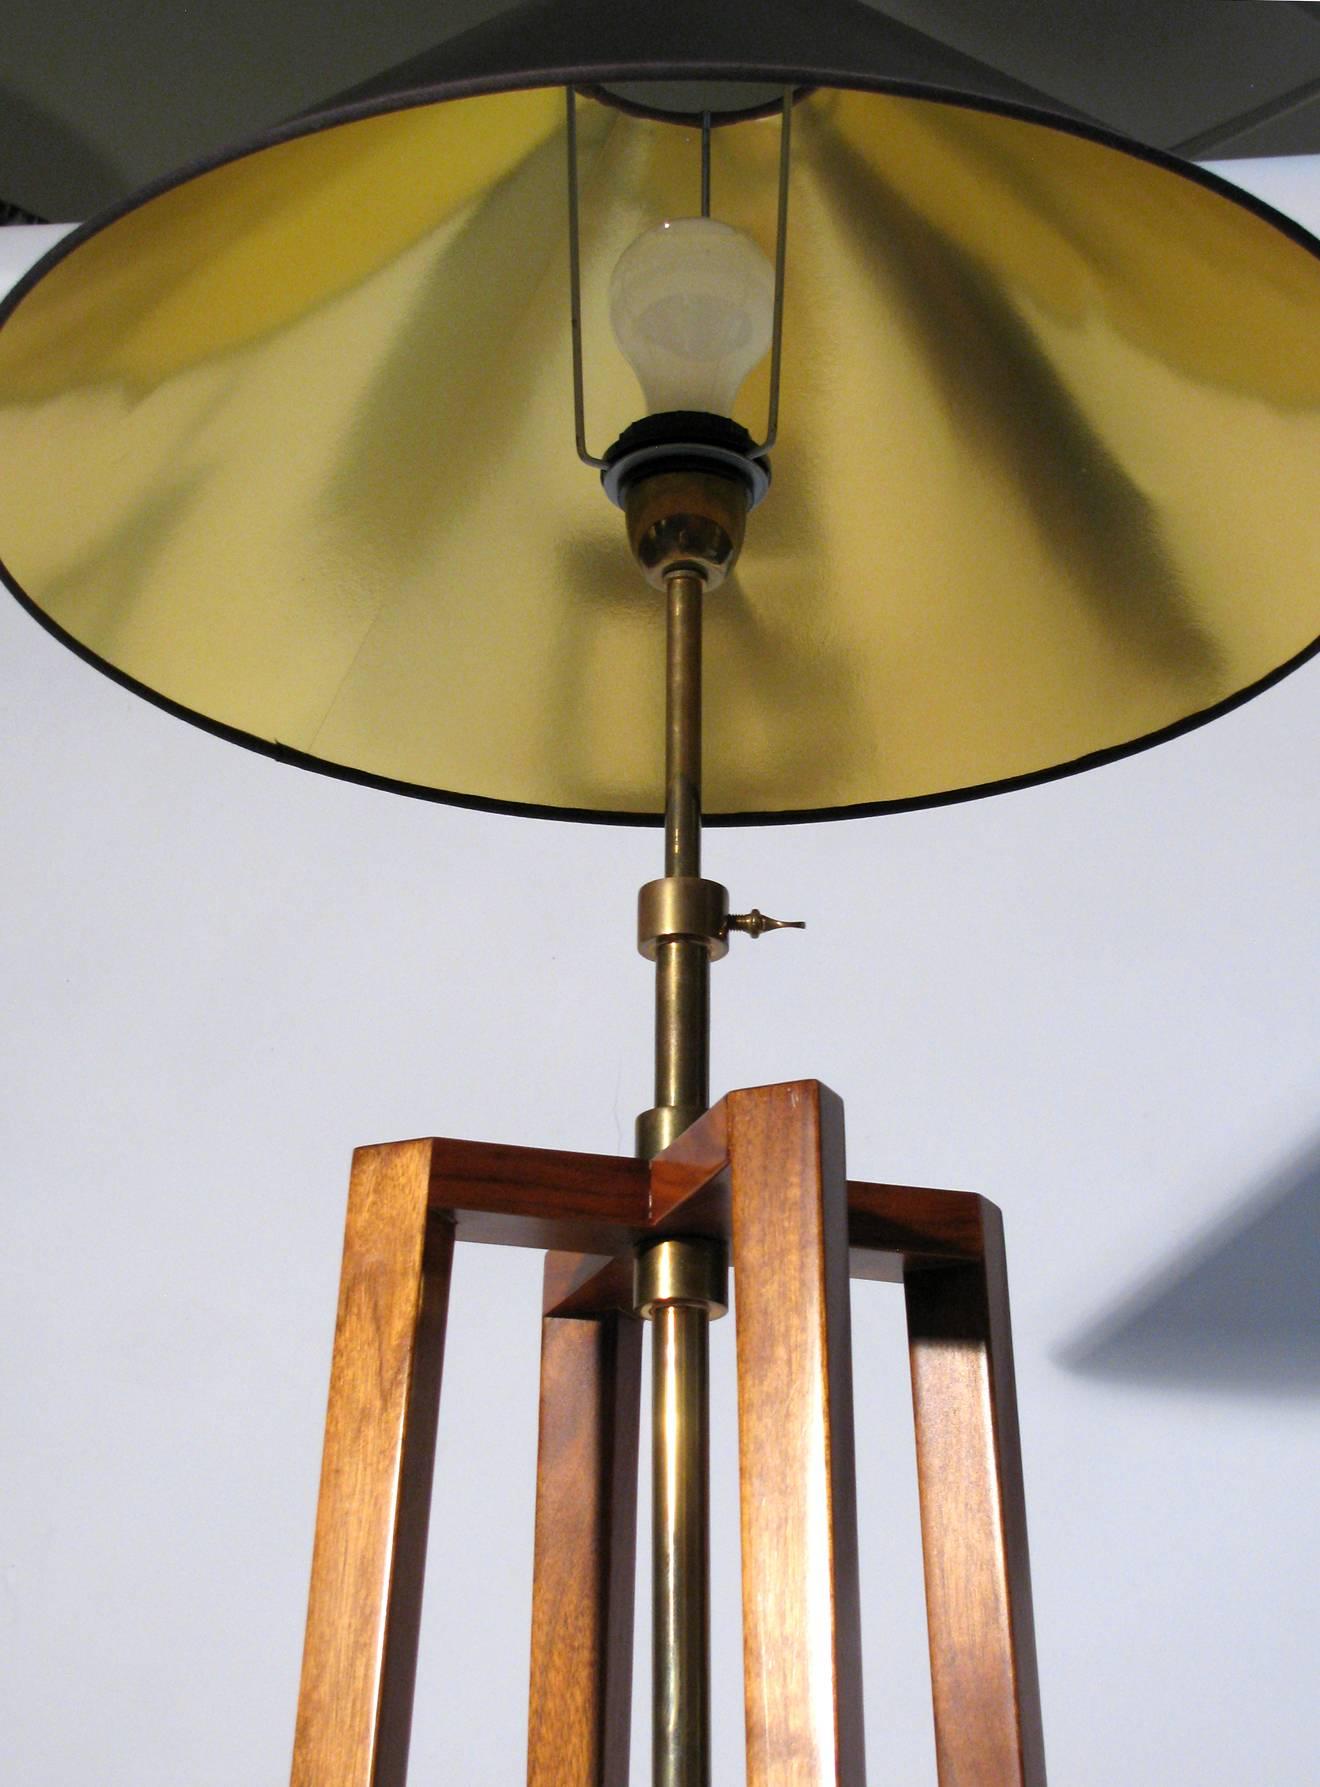 A floor lamp from the Mirak Collection, "Chevalet." The base is mahogany with brass hardware. Height is adjustable 55 inches to 62 inches. Gold foil paper shade is included and measures 20 inches diameter, 9 inches height, 4 inch top